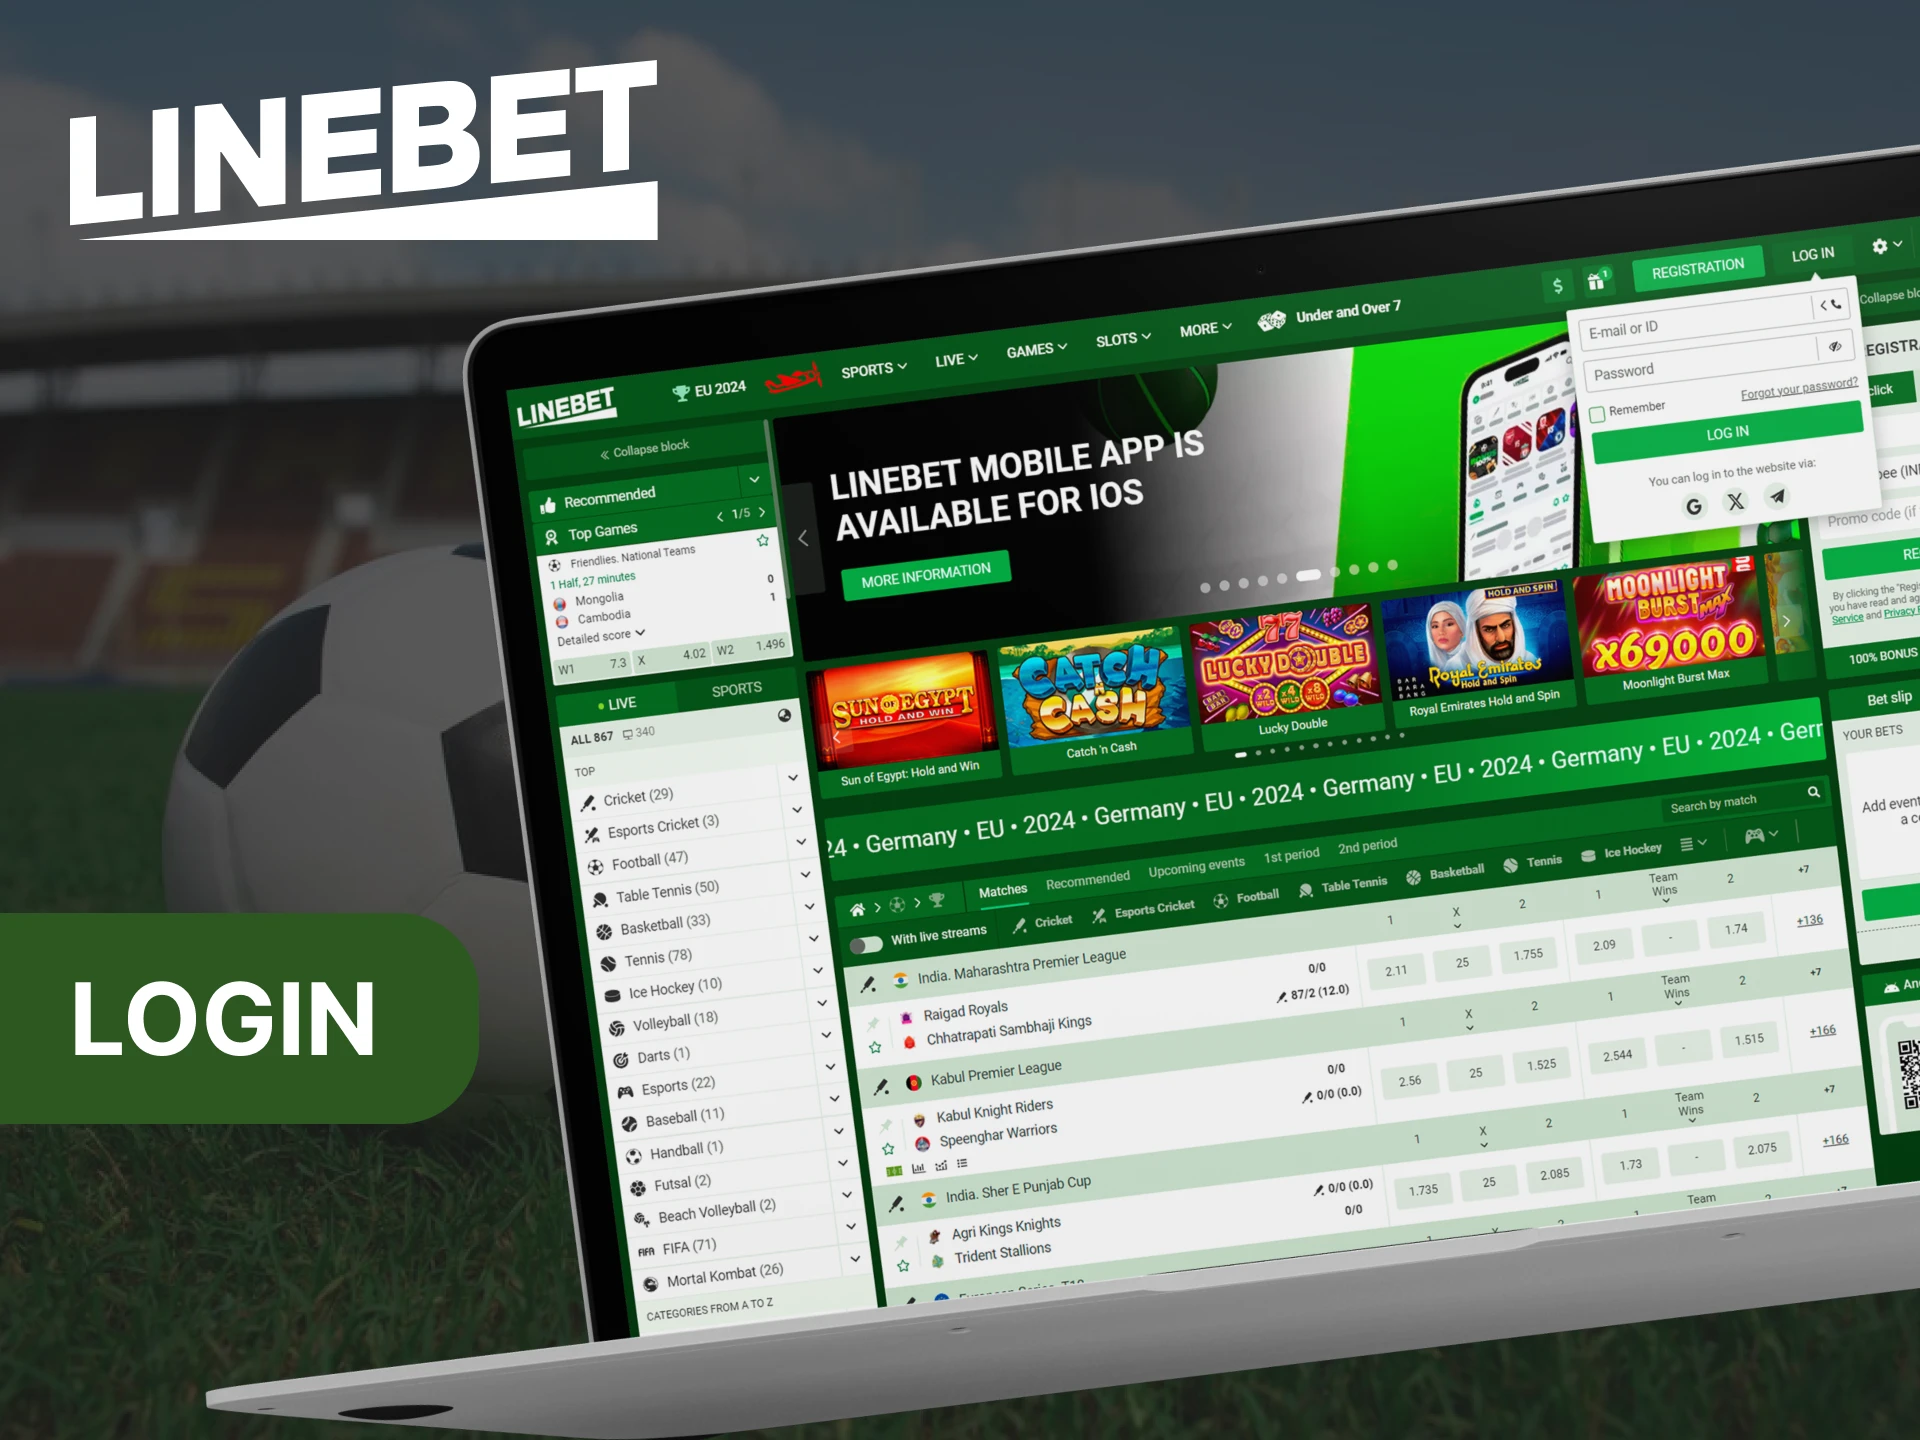 You can easily log into your Linebet account.